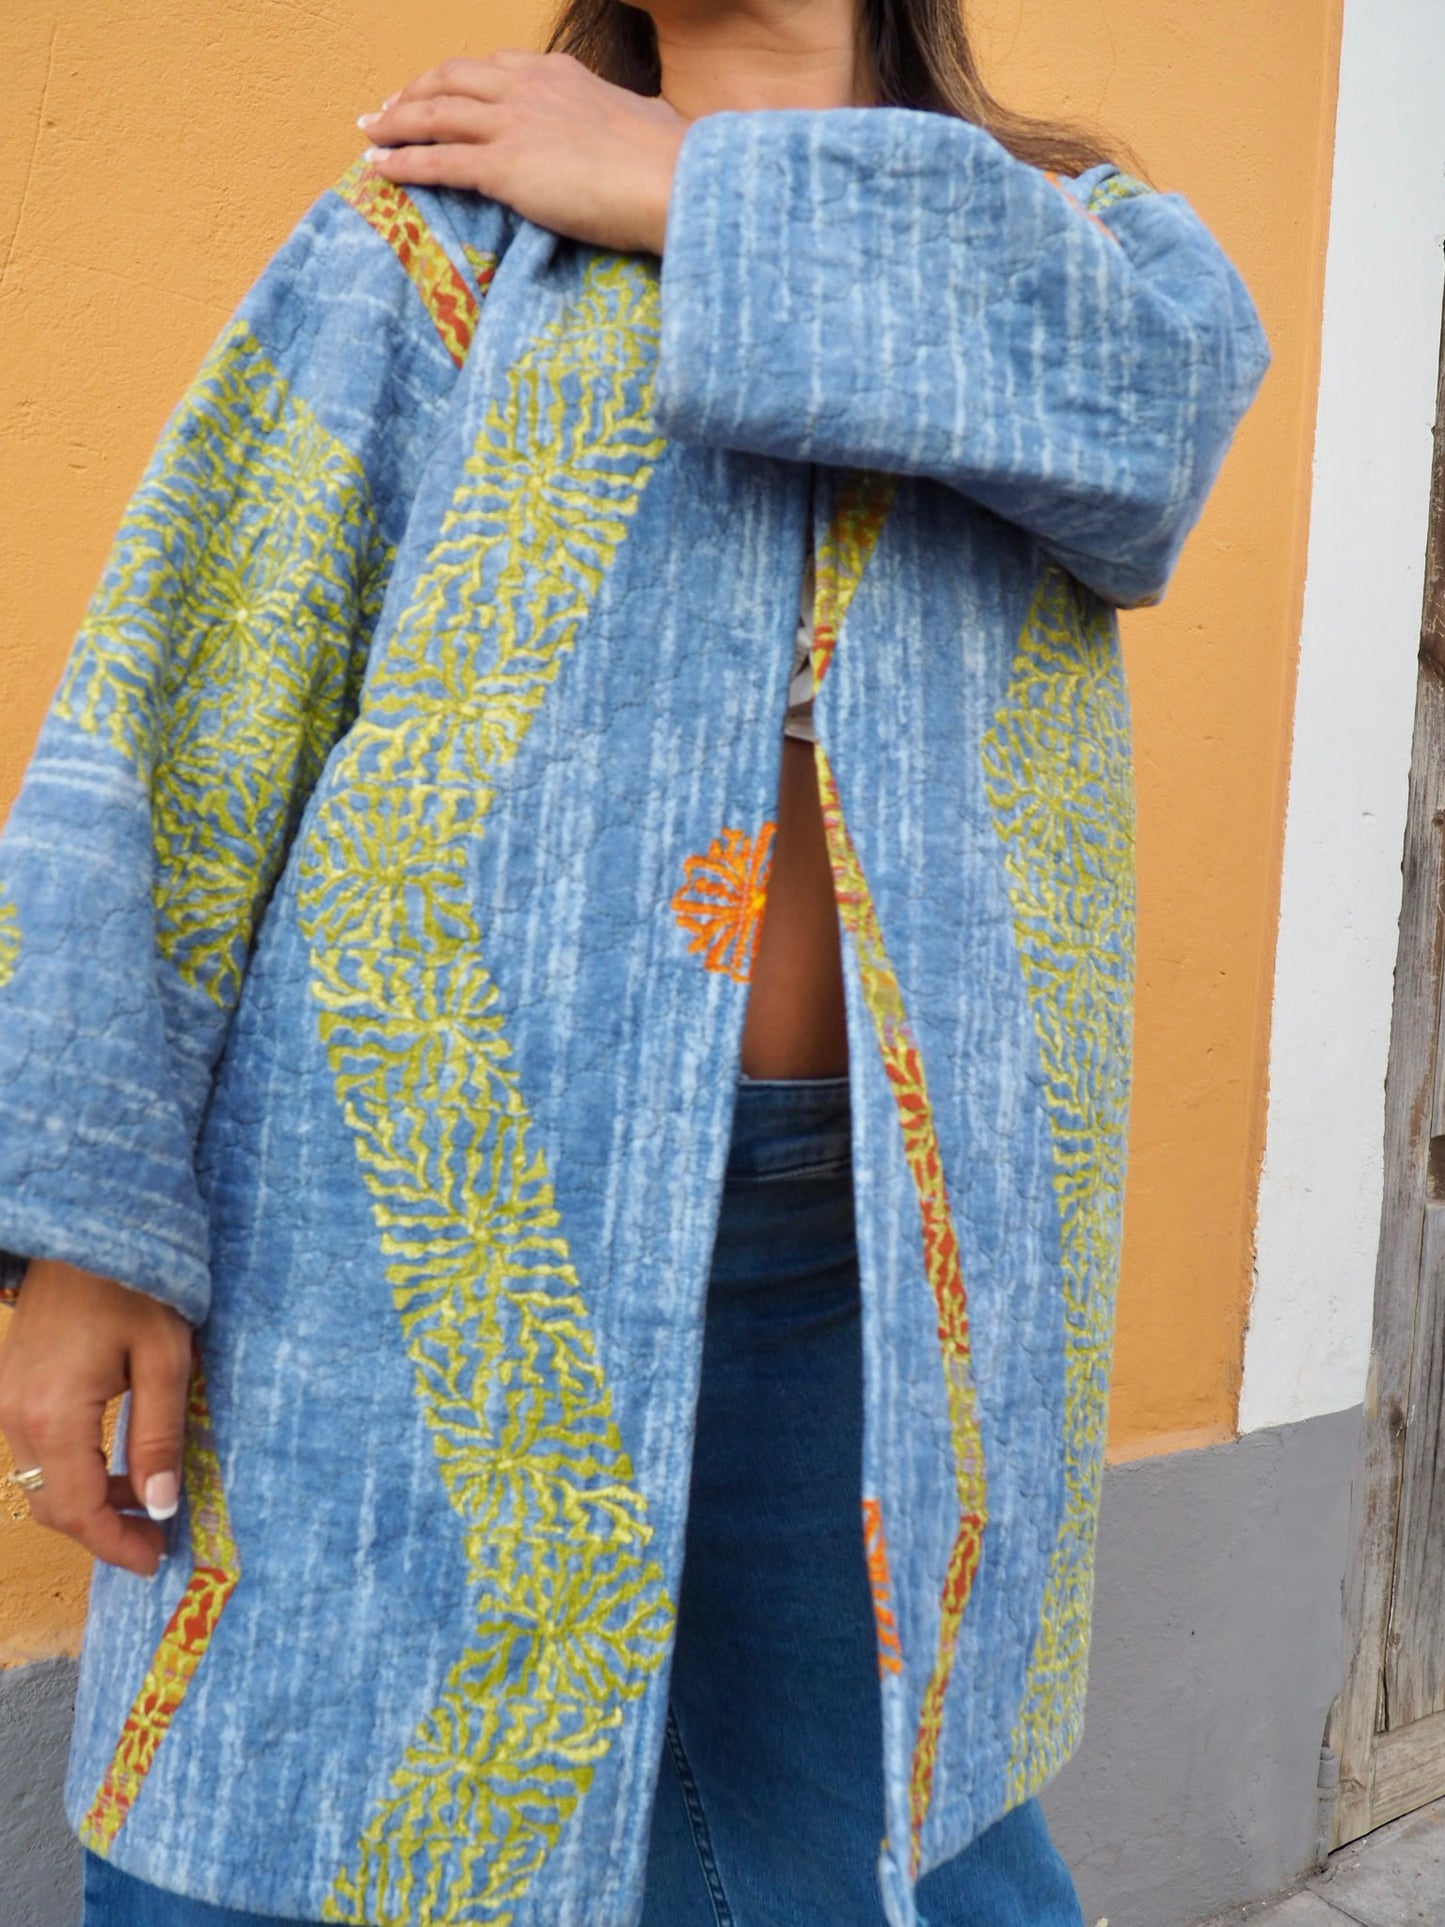 Vintage quilted blue patterned blanket jacket up-cycled by Vagabond Ibiza